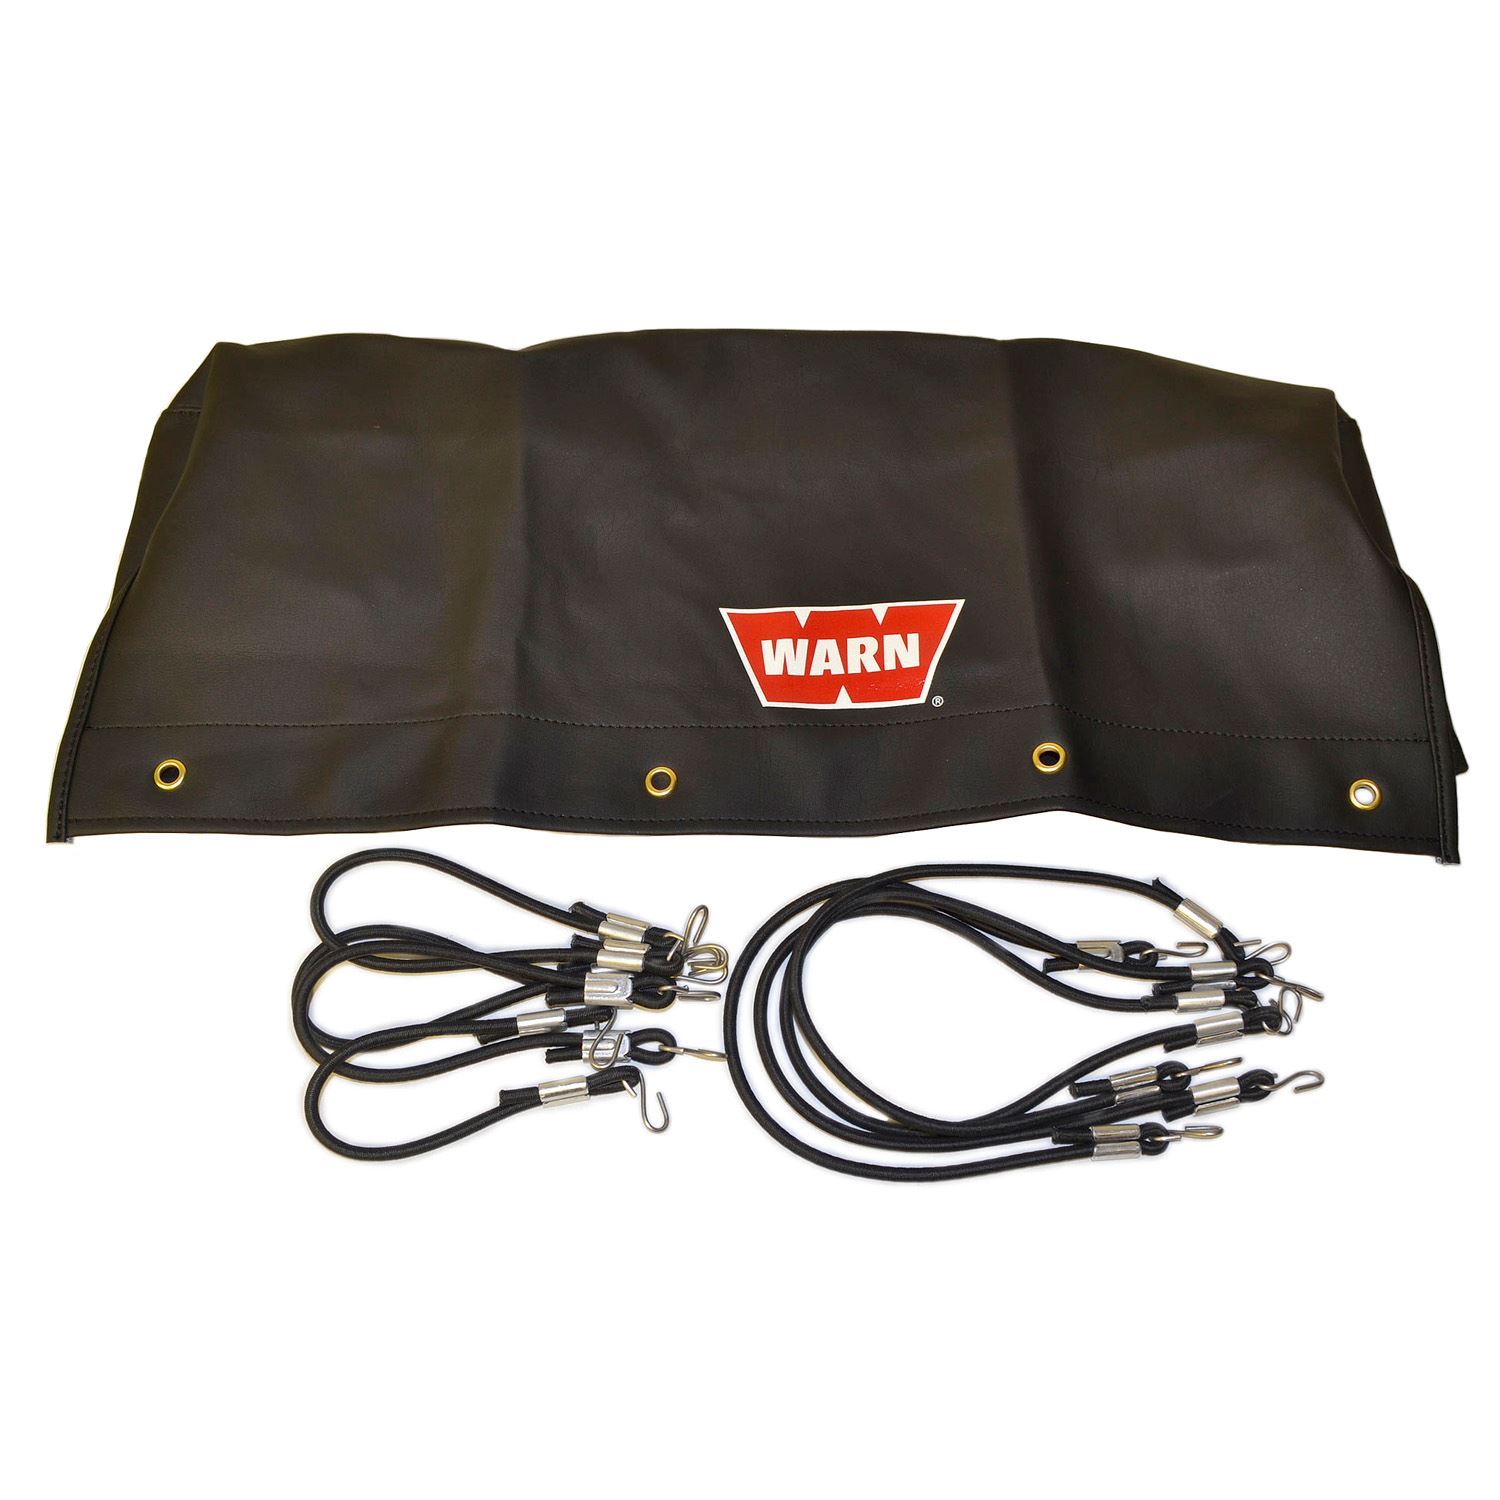 WARN Soft Winch Cover for 9.5ti and XD9000i